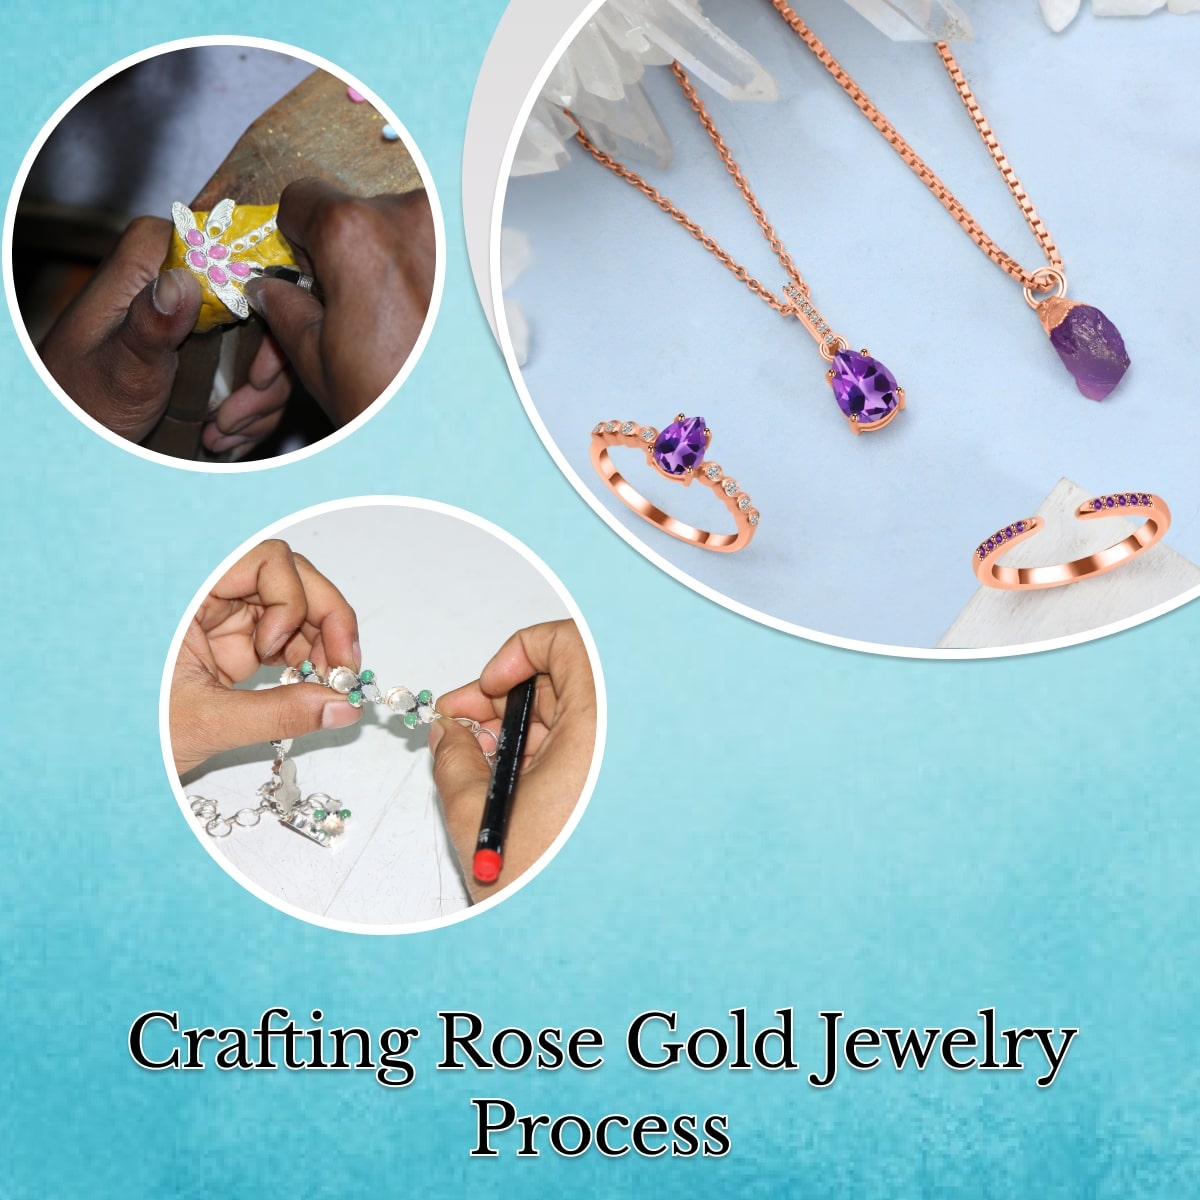 How Is Rose Gold Jewelry Made?